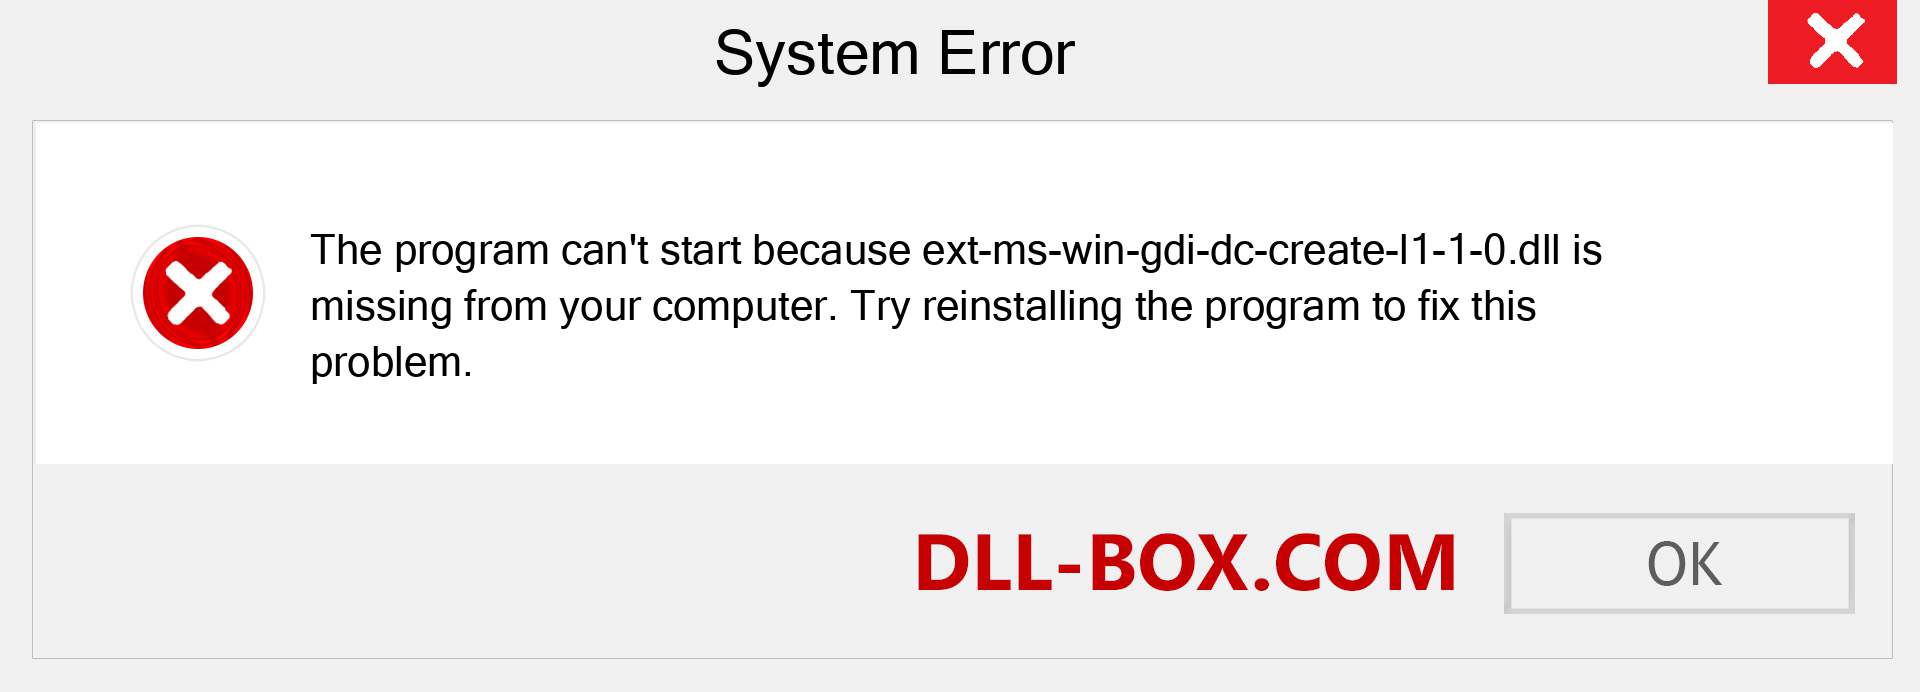  ext-ms-win-gdi-dc-create-l1-1-0.dll file is missing?. Download for Windows 7, 8, 10 - Fix  ext-ms-win-gdi-dc-create-l1-1-0 dll Missing Error on Windows, photos, images